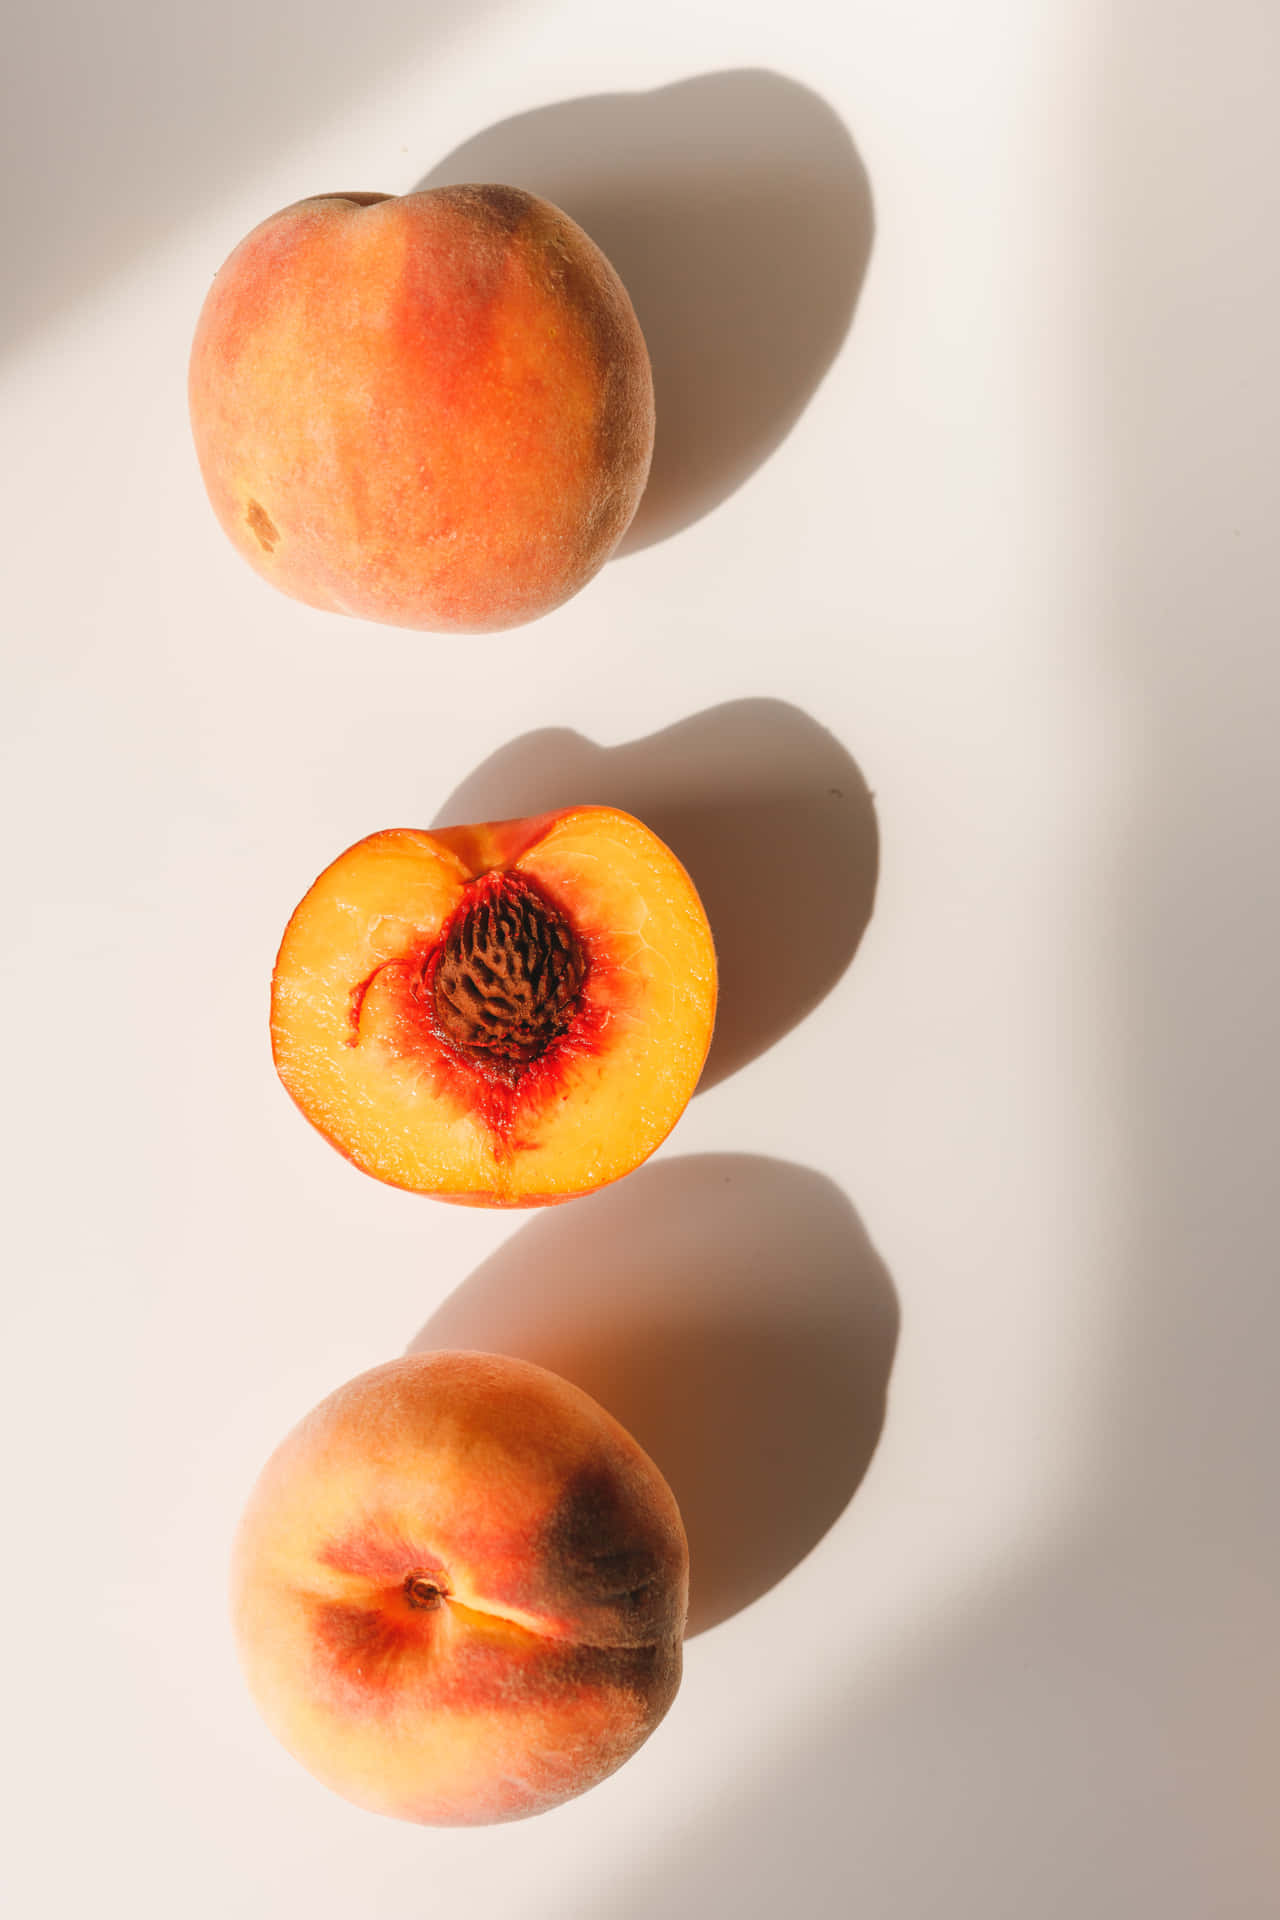 A sweet and juicy bowl of ripe peaches.